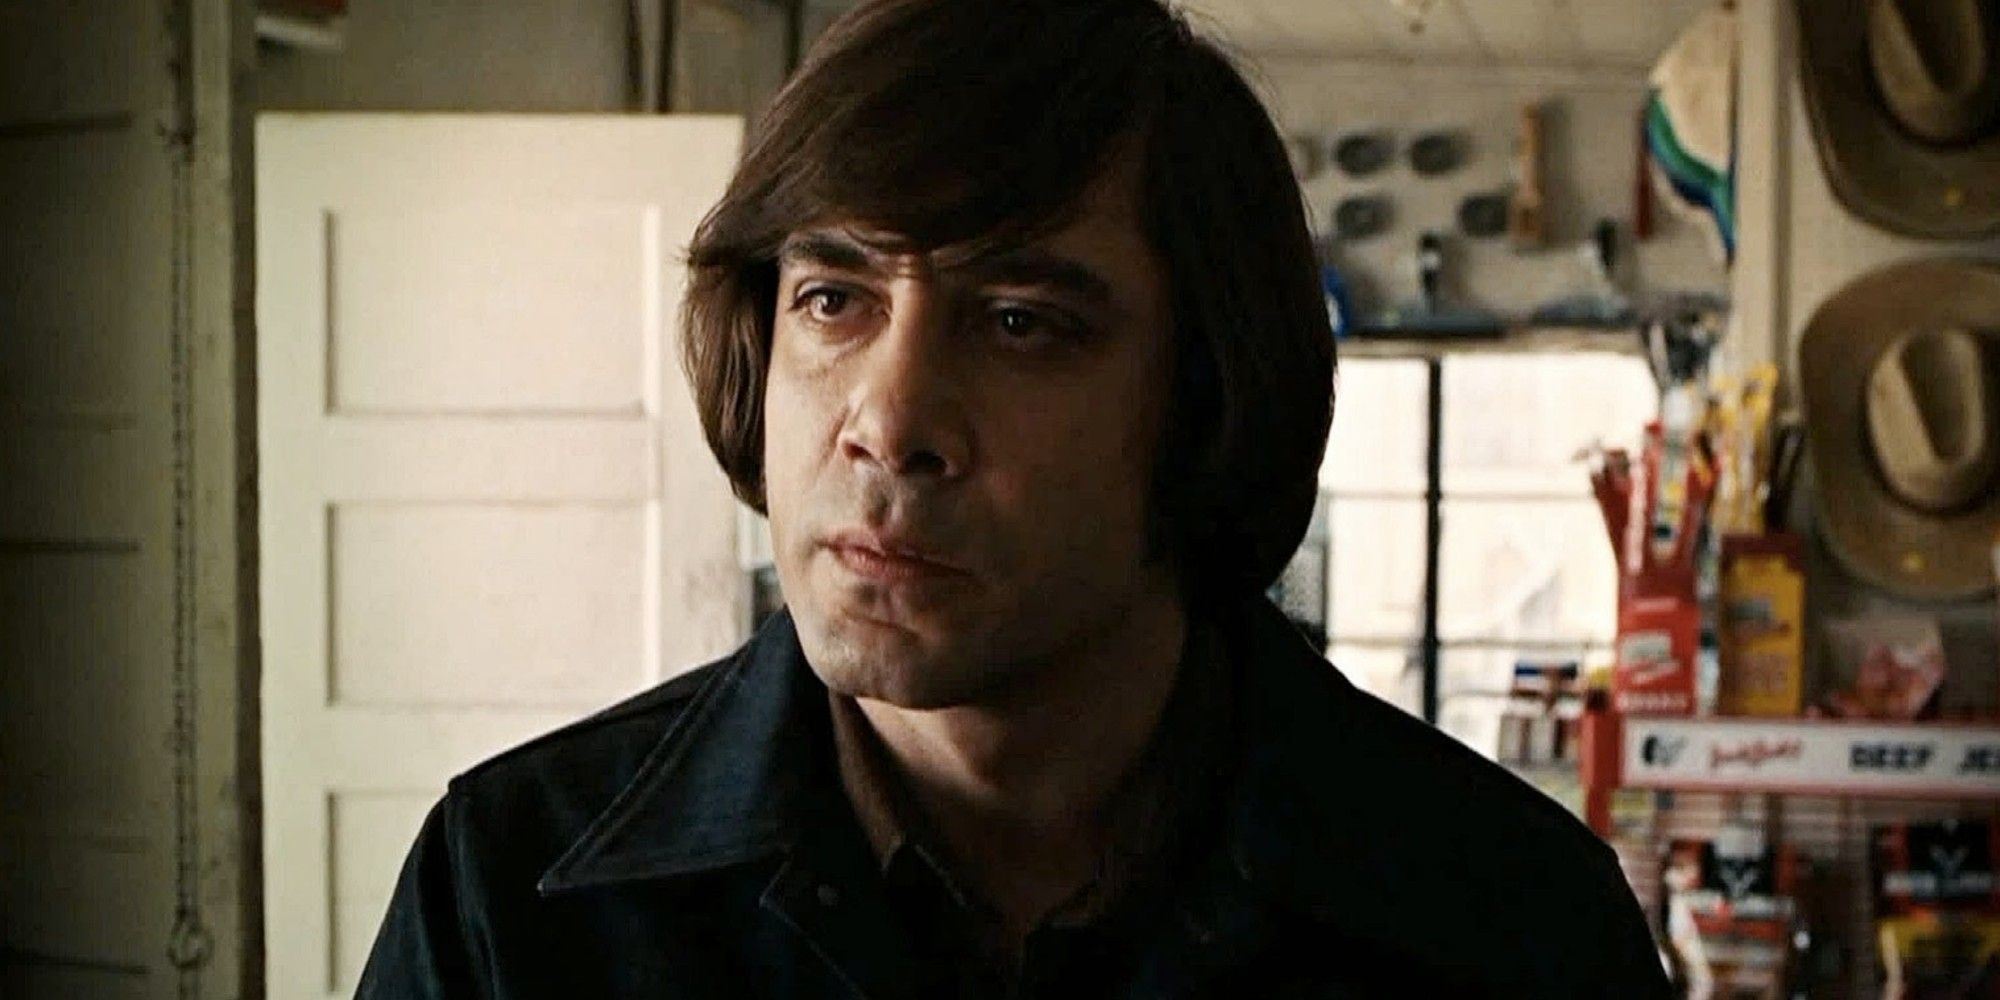 Anton Chigurh at a store looking intently in No Country for Old Men